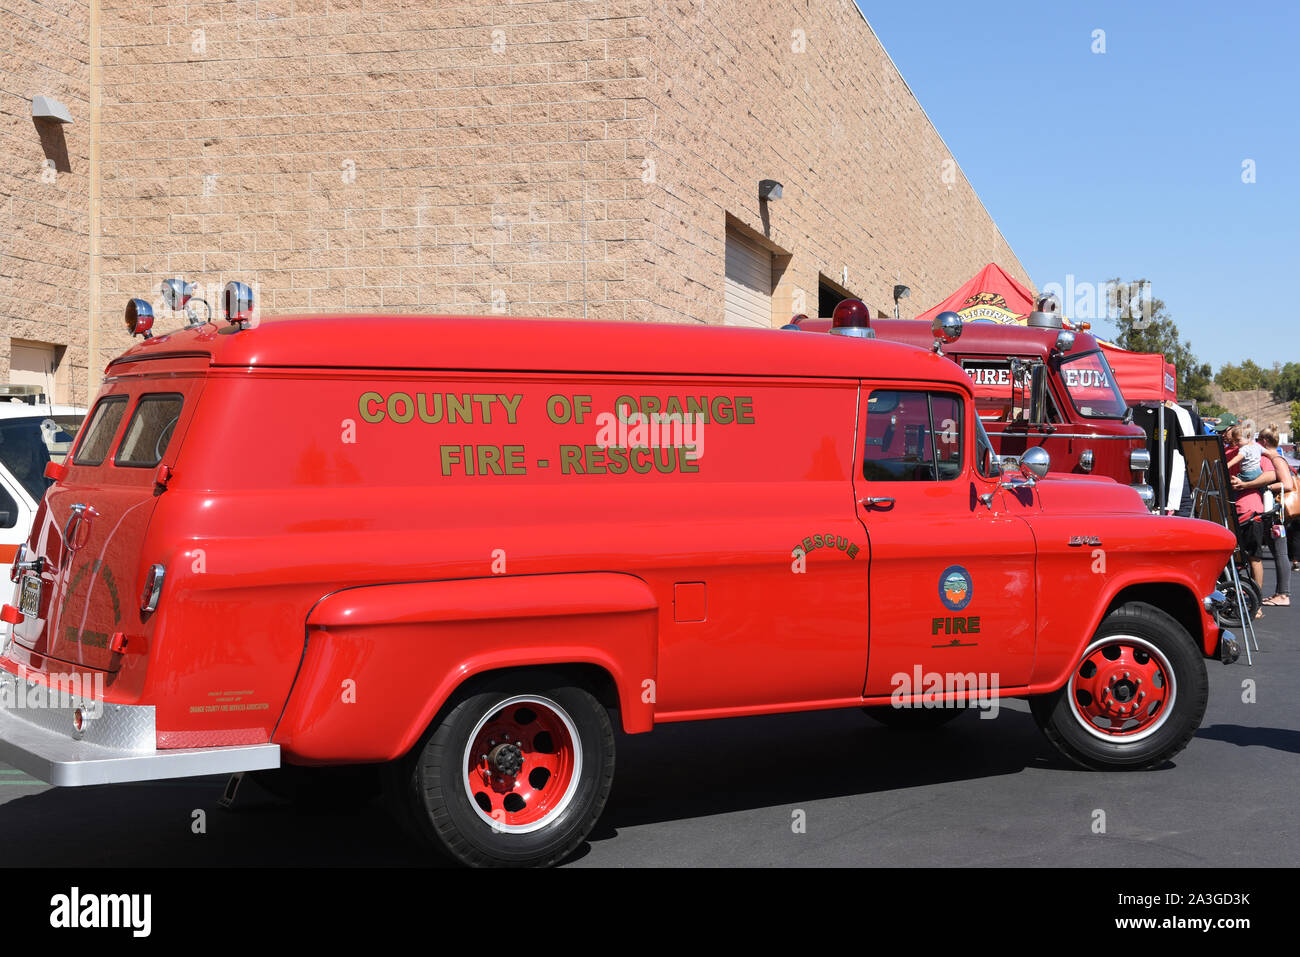 IRVINE, CALIFORNIA - 5 OCT 2019: Antique Fire Rescue Vehicle at the Orange County Fire Authority annual open house. Stock Photo